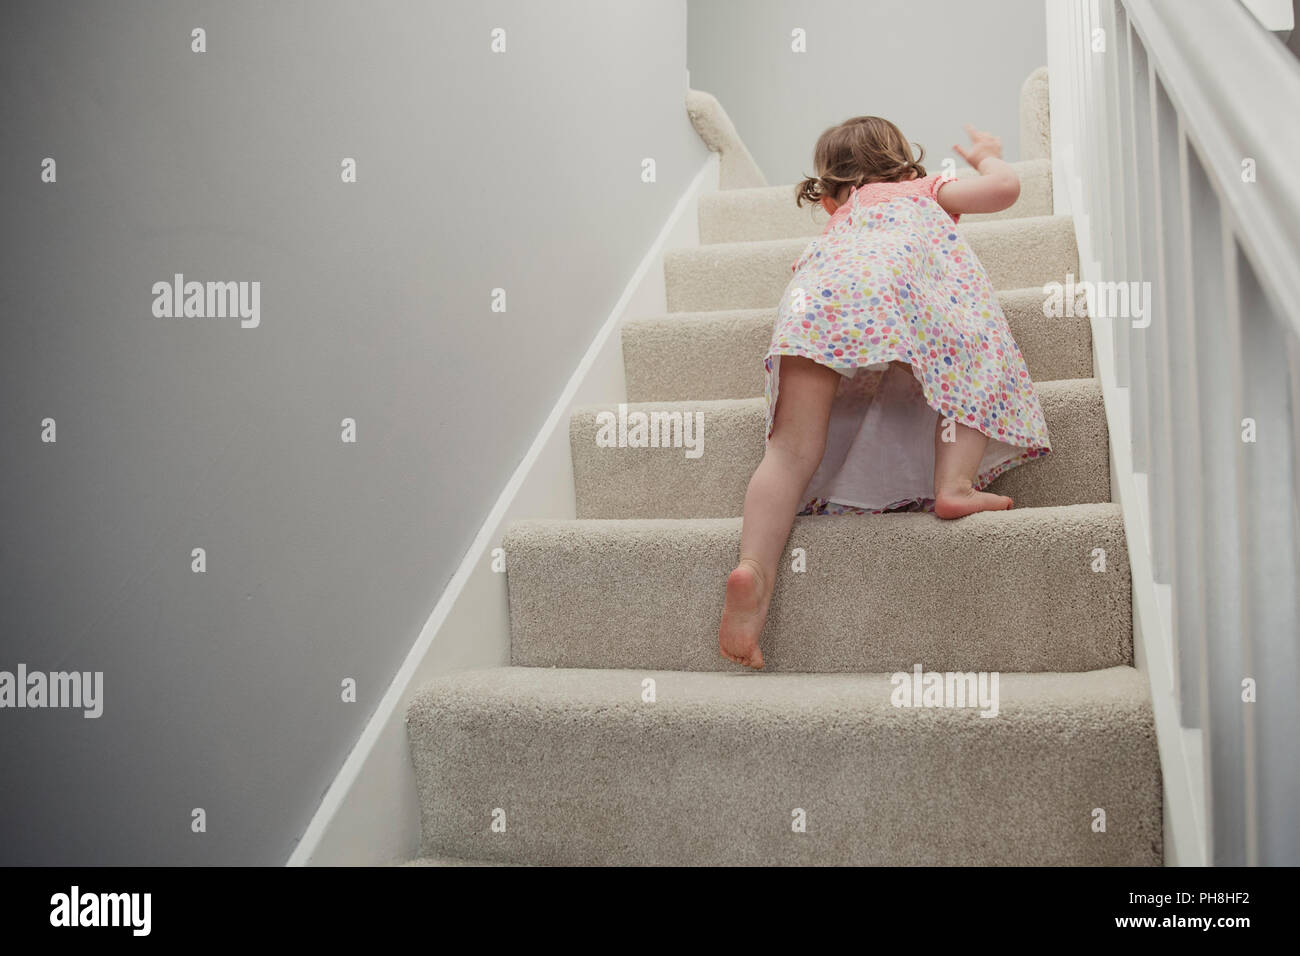 Rear view of a little girl climbing up the stairs in the house. She is ...